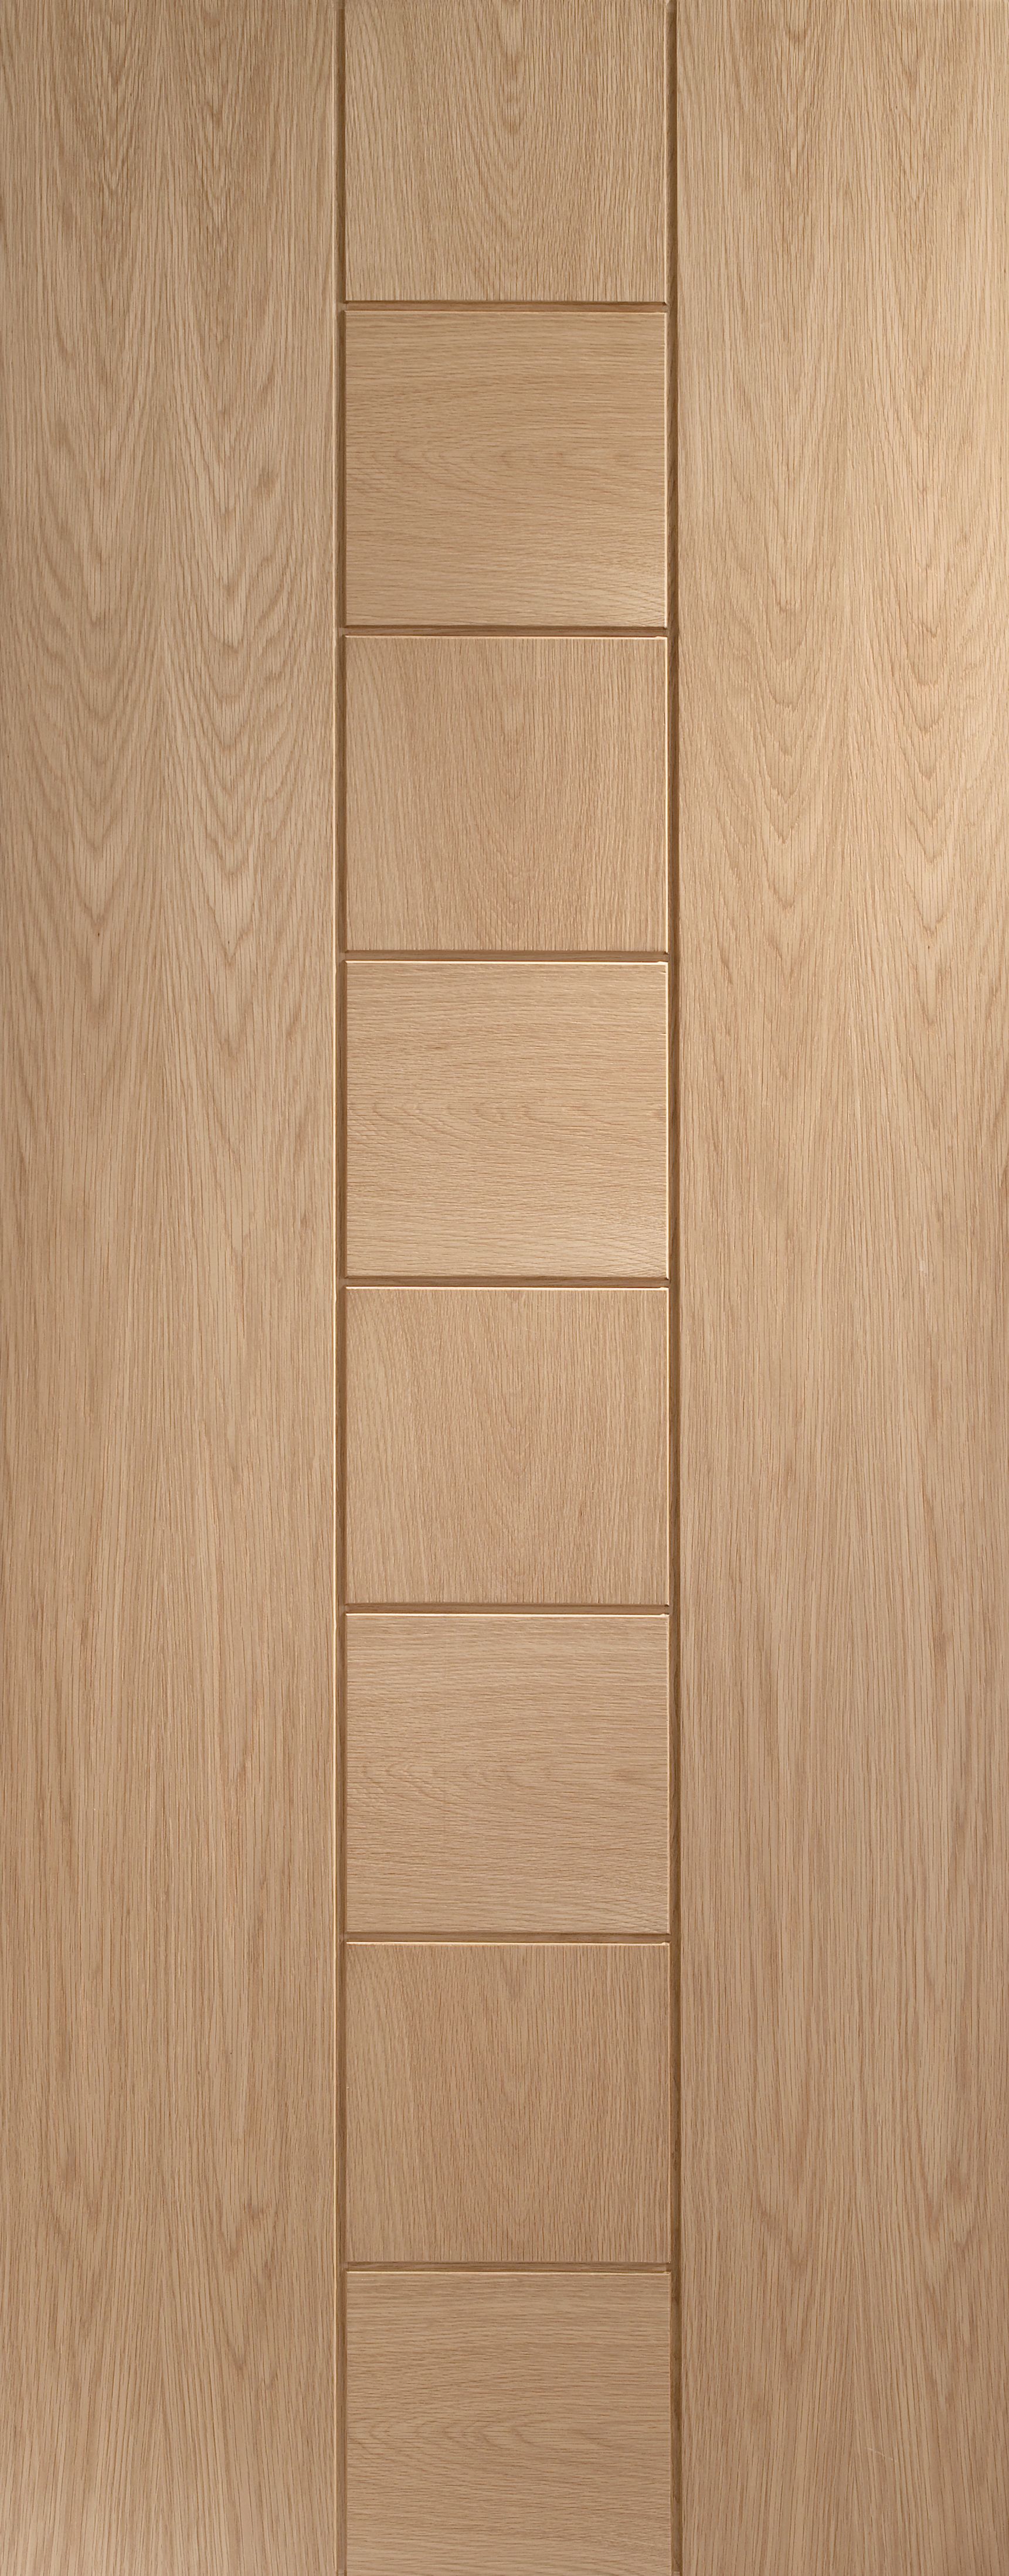 Image of XL Joinery Messina Oak 8 Panel Pre Finished Internal Door - 1981 x 686mm